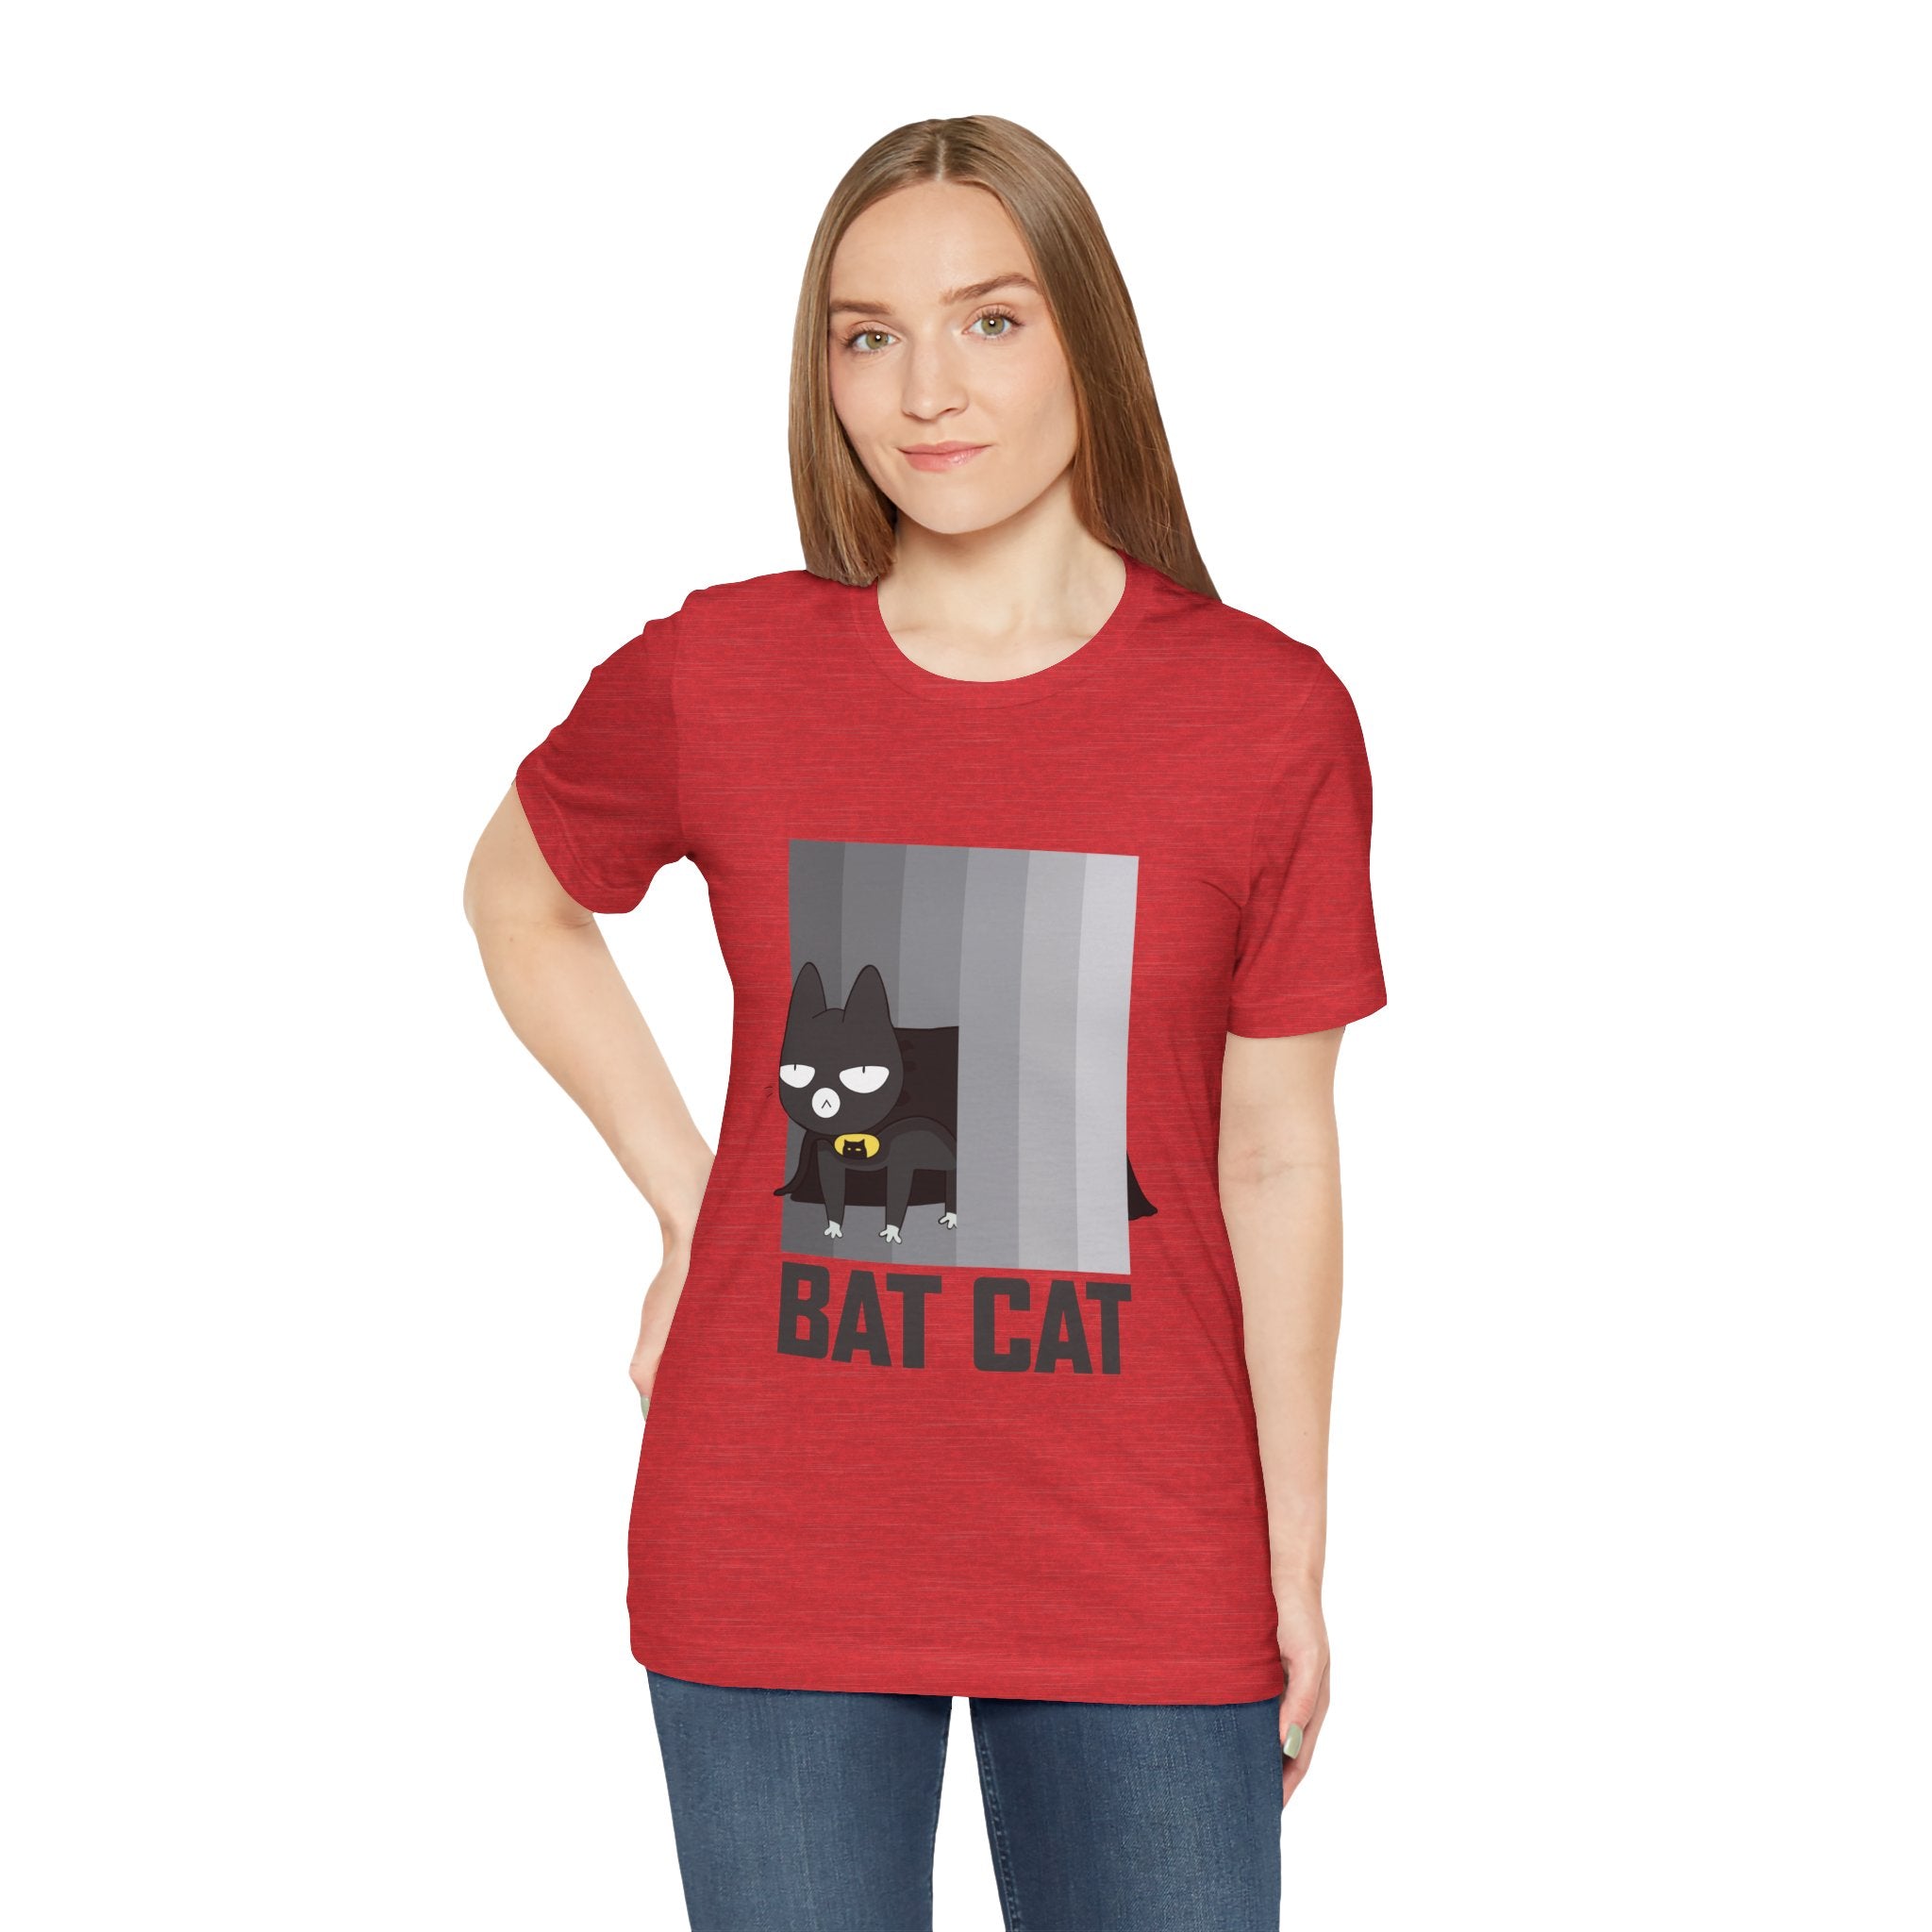 Woman in a red BATCAT T-Shirt with a graphic design.